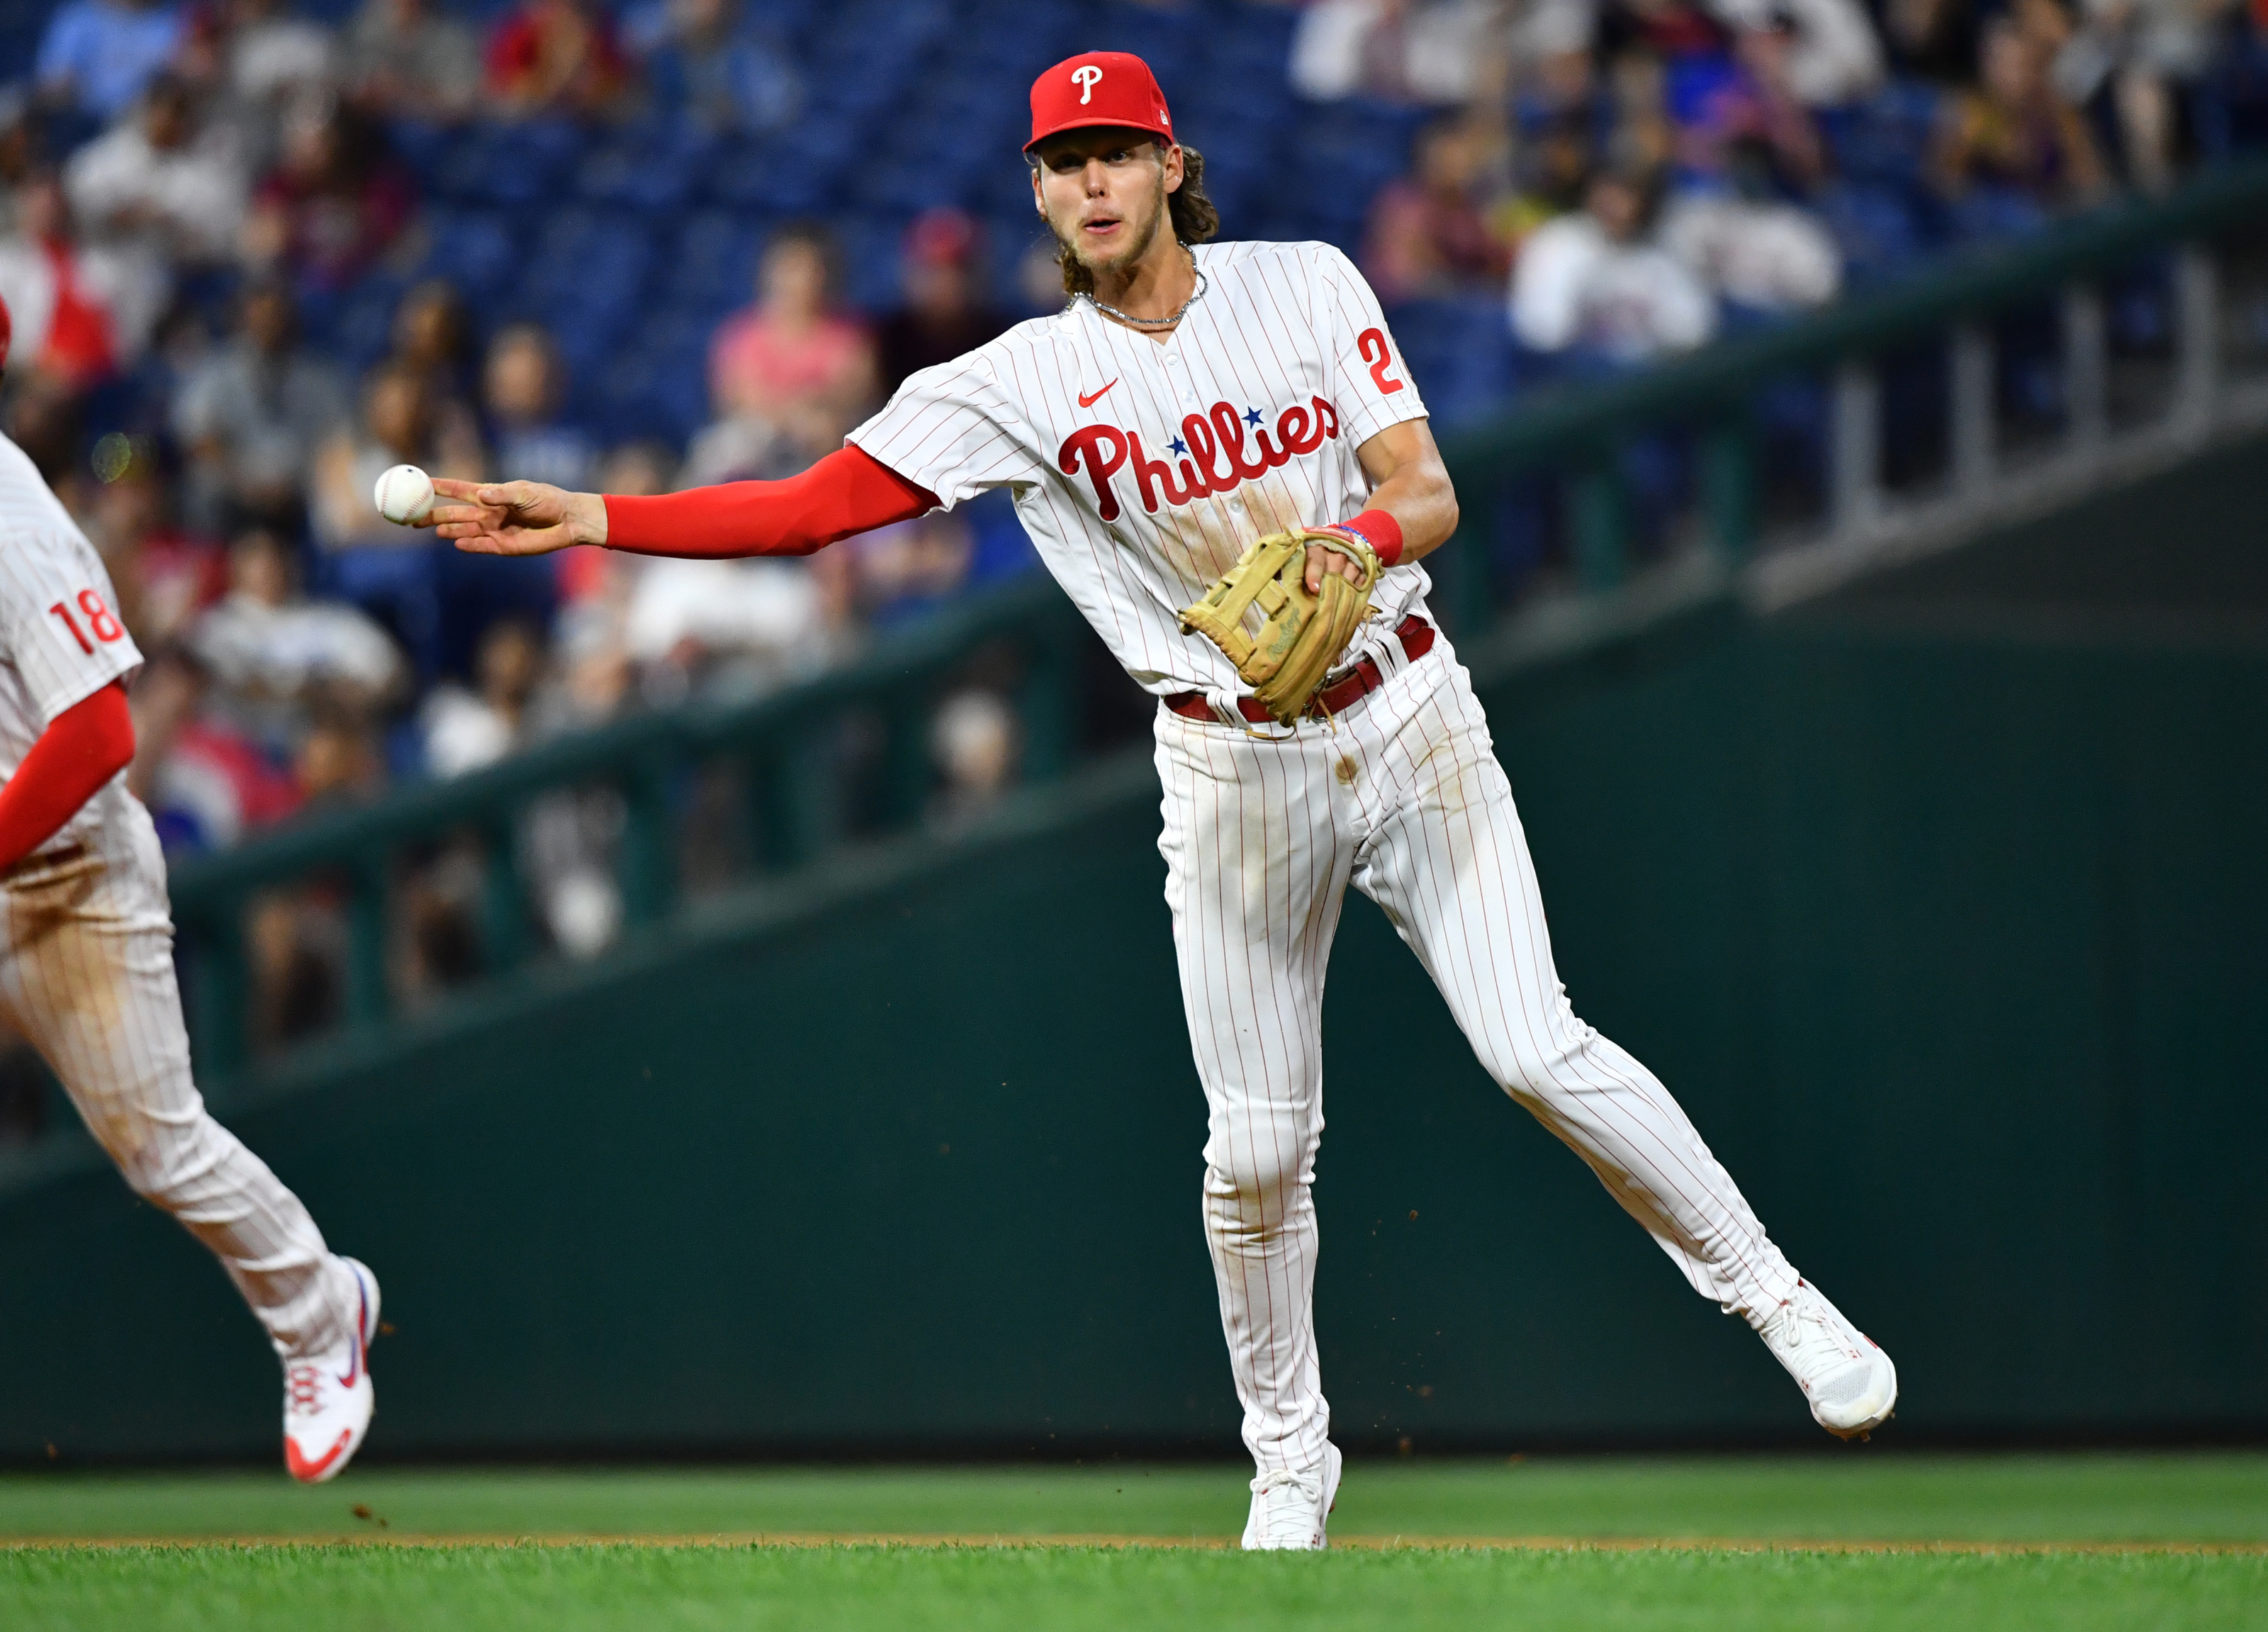 Bryson Stott Alec Bohm both set to make Opening Day roster for Phillies   Phillies Nation  Your source for Philadelphia Phillies news opinion  history rumors events and other fun stuff